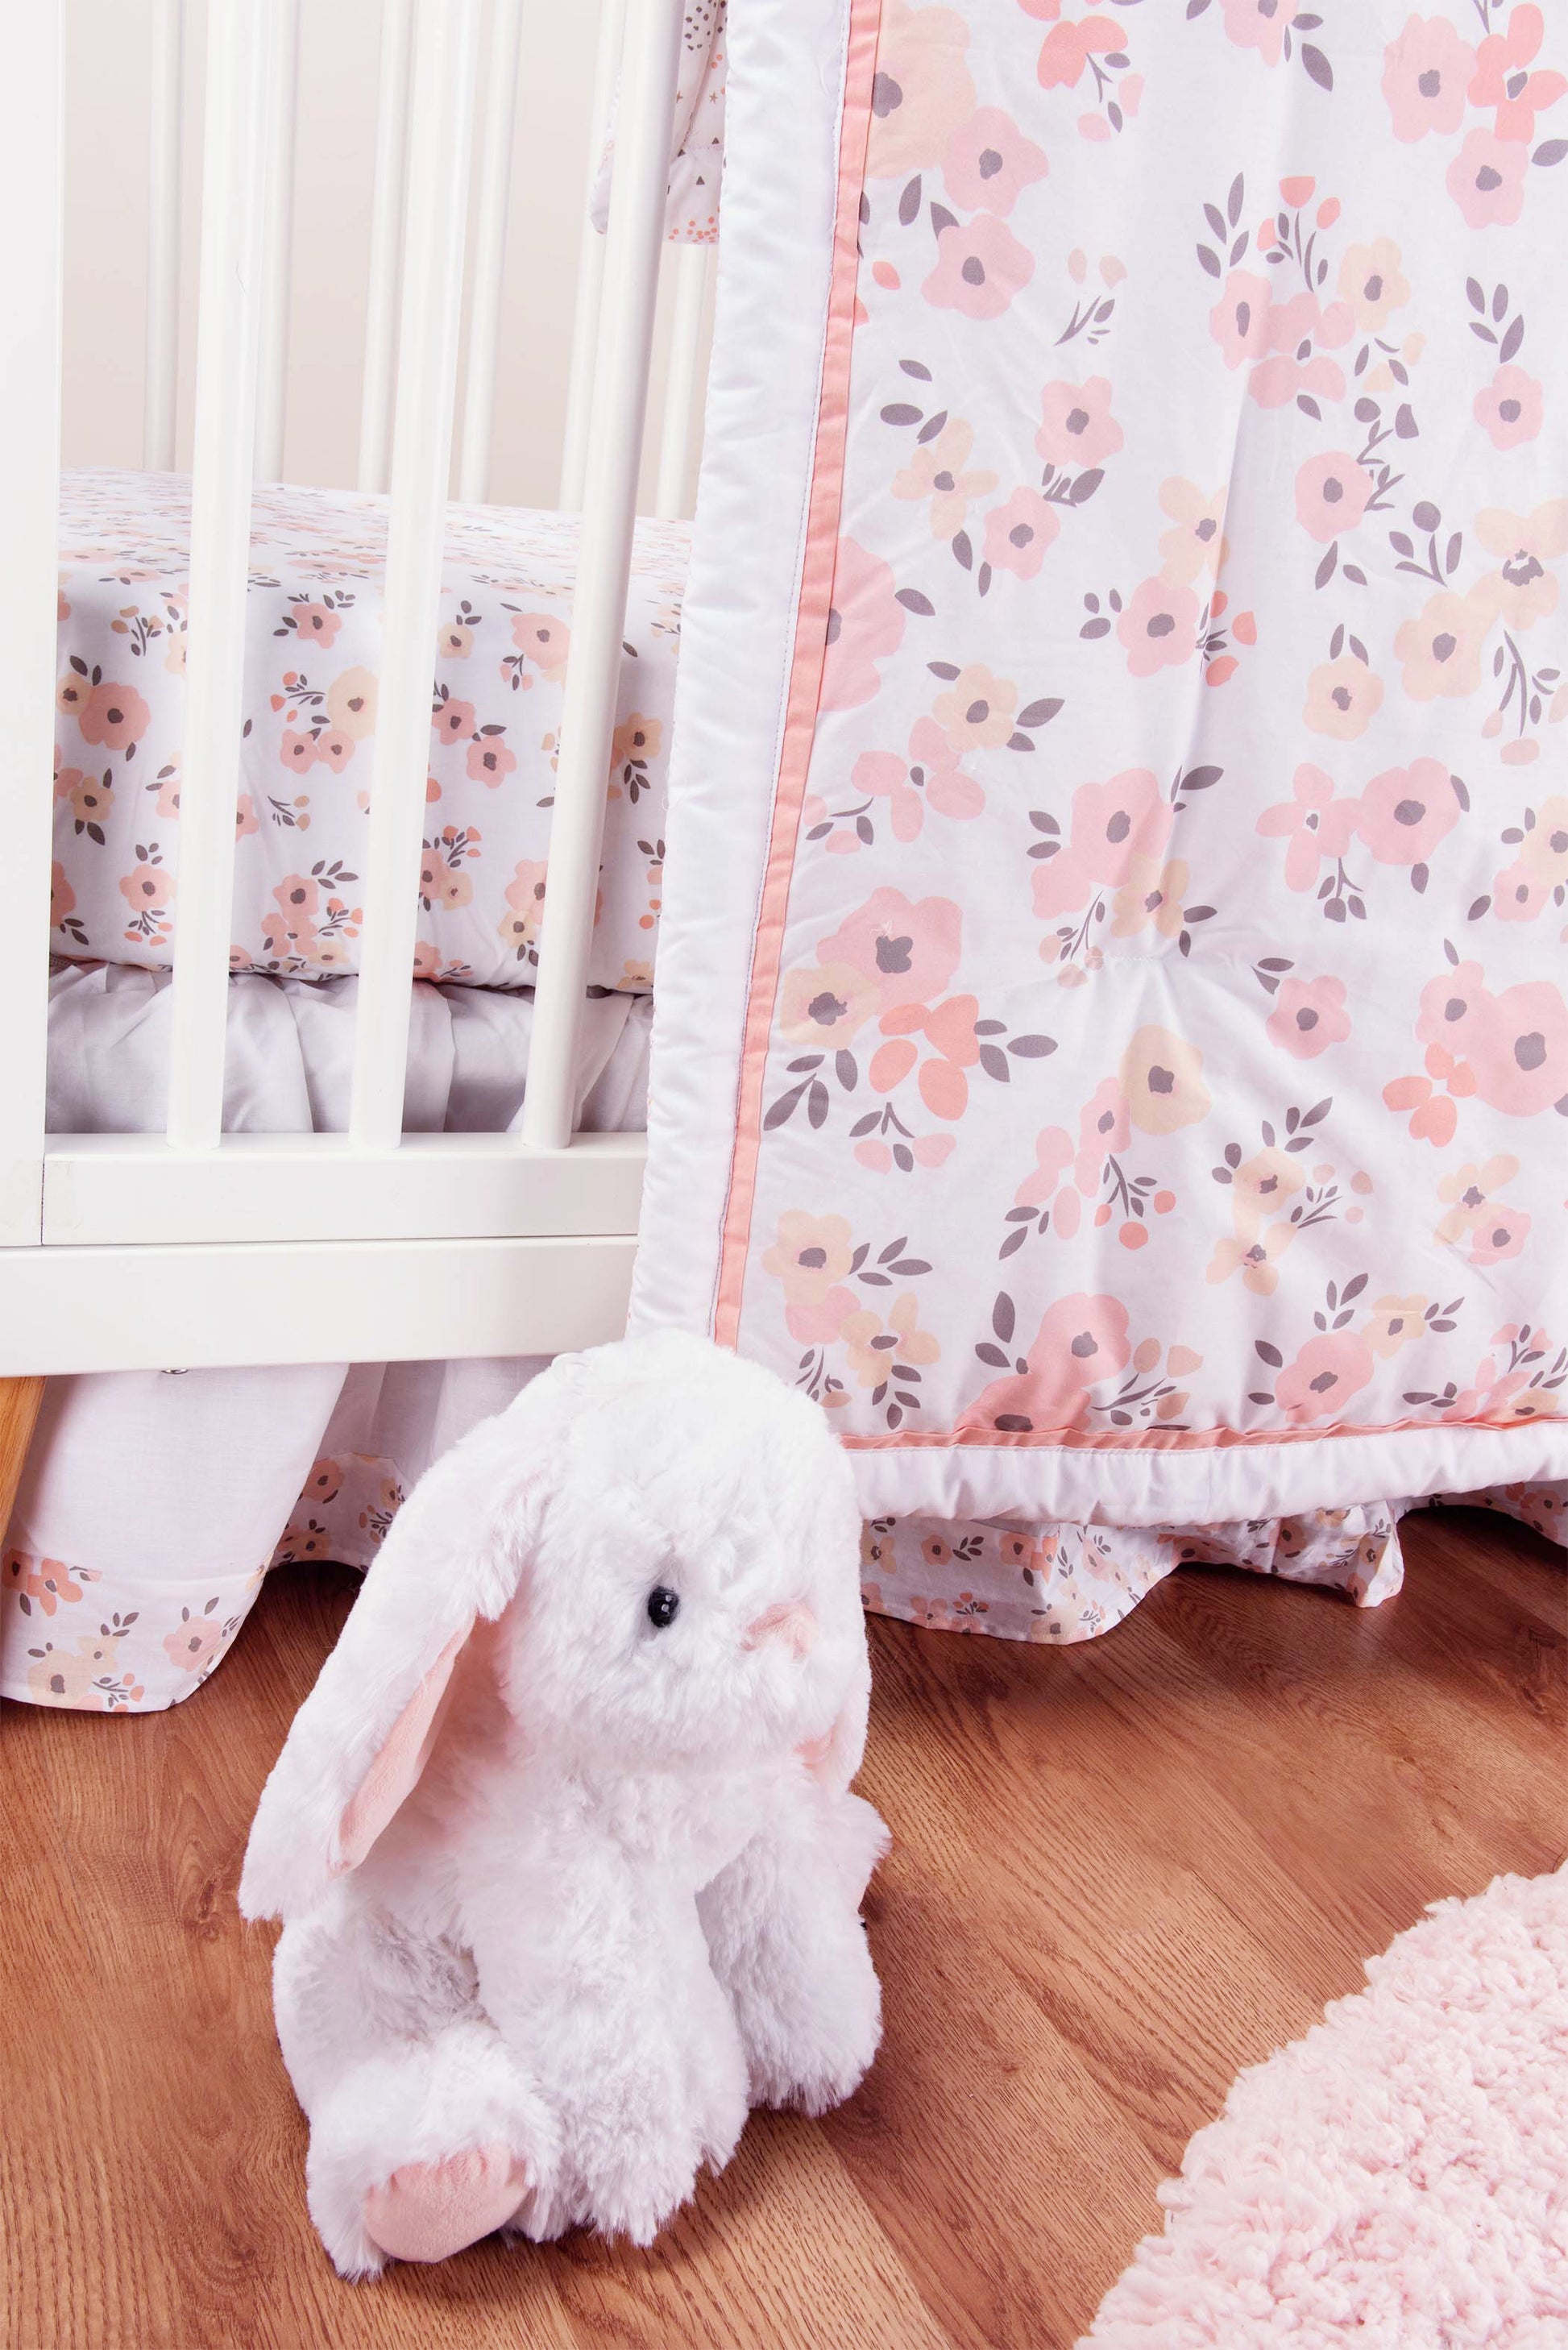 Stylized in Room Blush Floral 3 Piece Crib Bedding Set - features coordinating plush